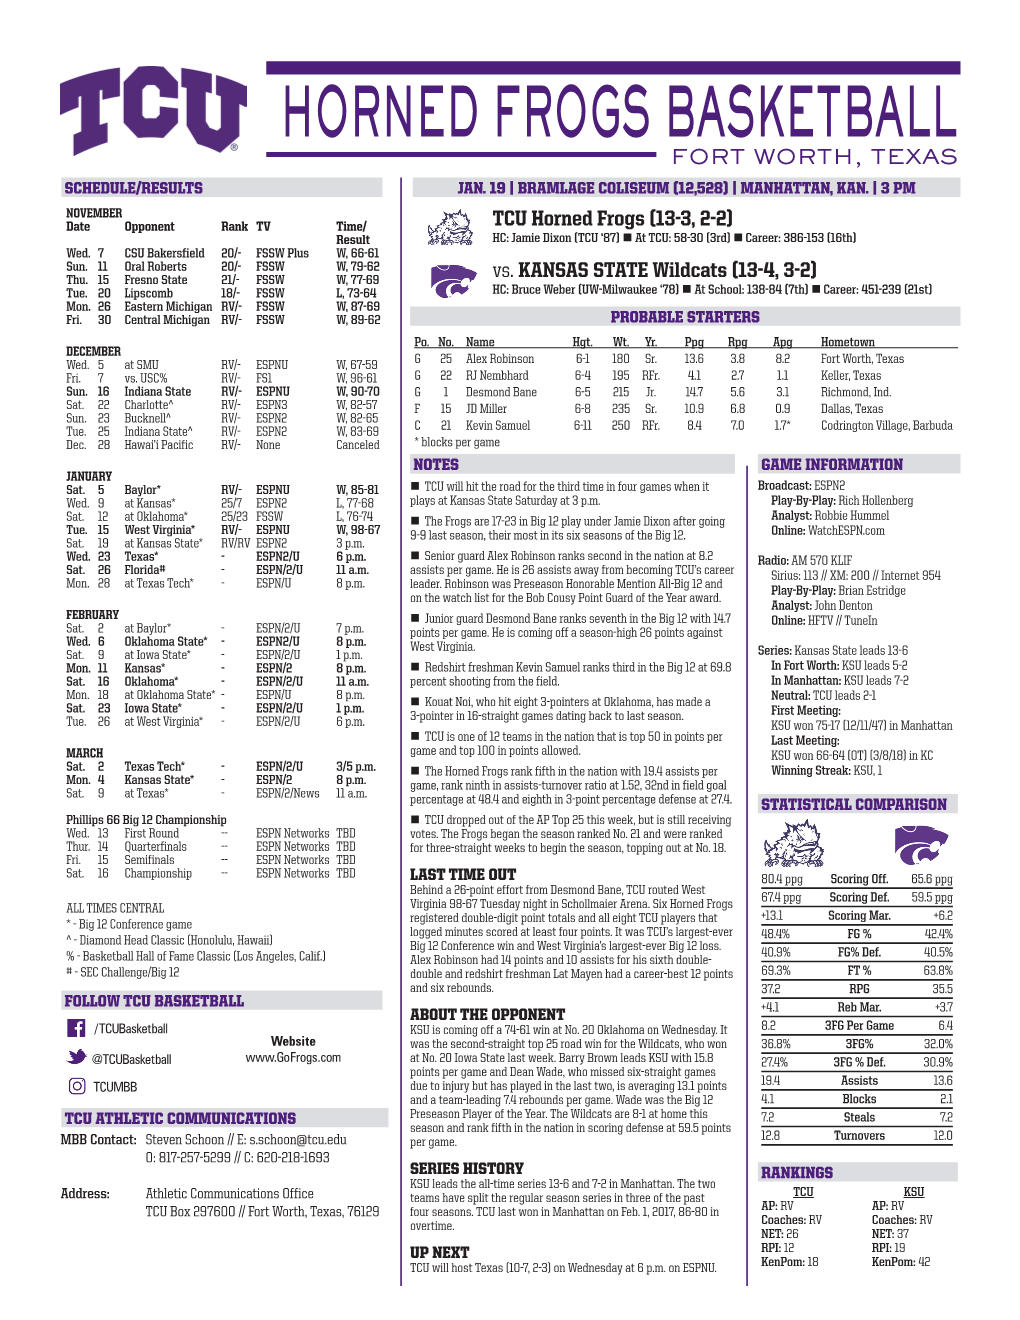 Horned Frogs Basketball Fort Worth, Texas Schedule/Results Jan